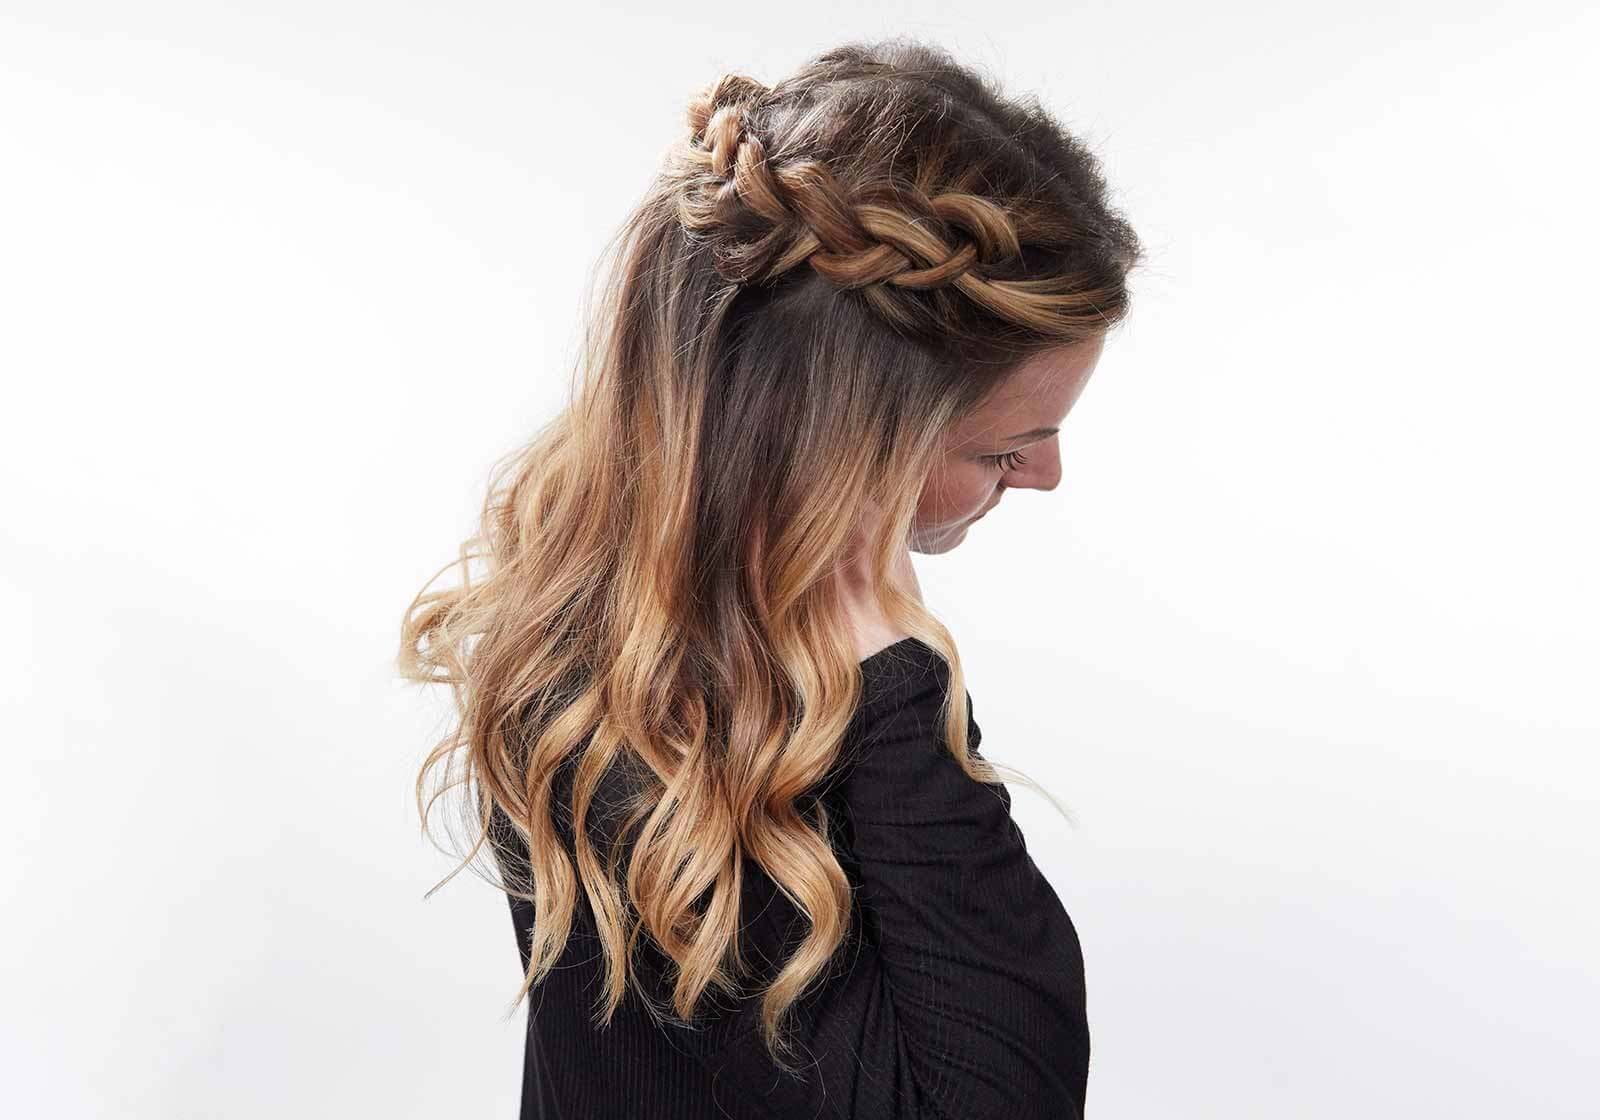 Swept away - try this sweeping half French braid tutorial - Hair Romance